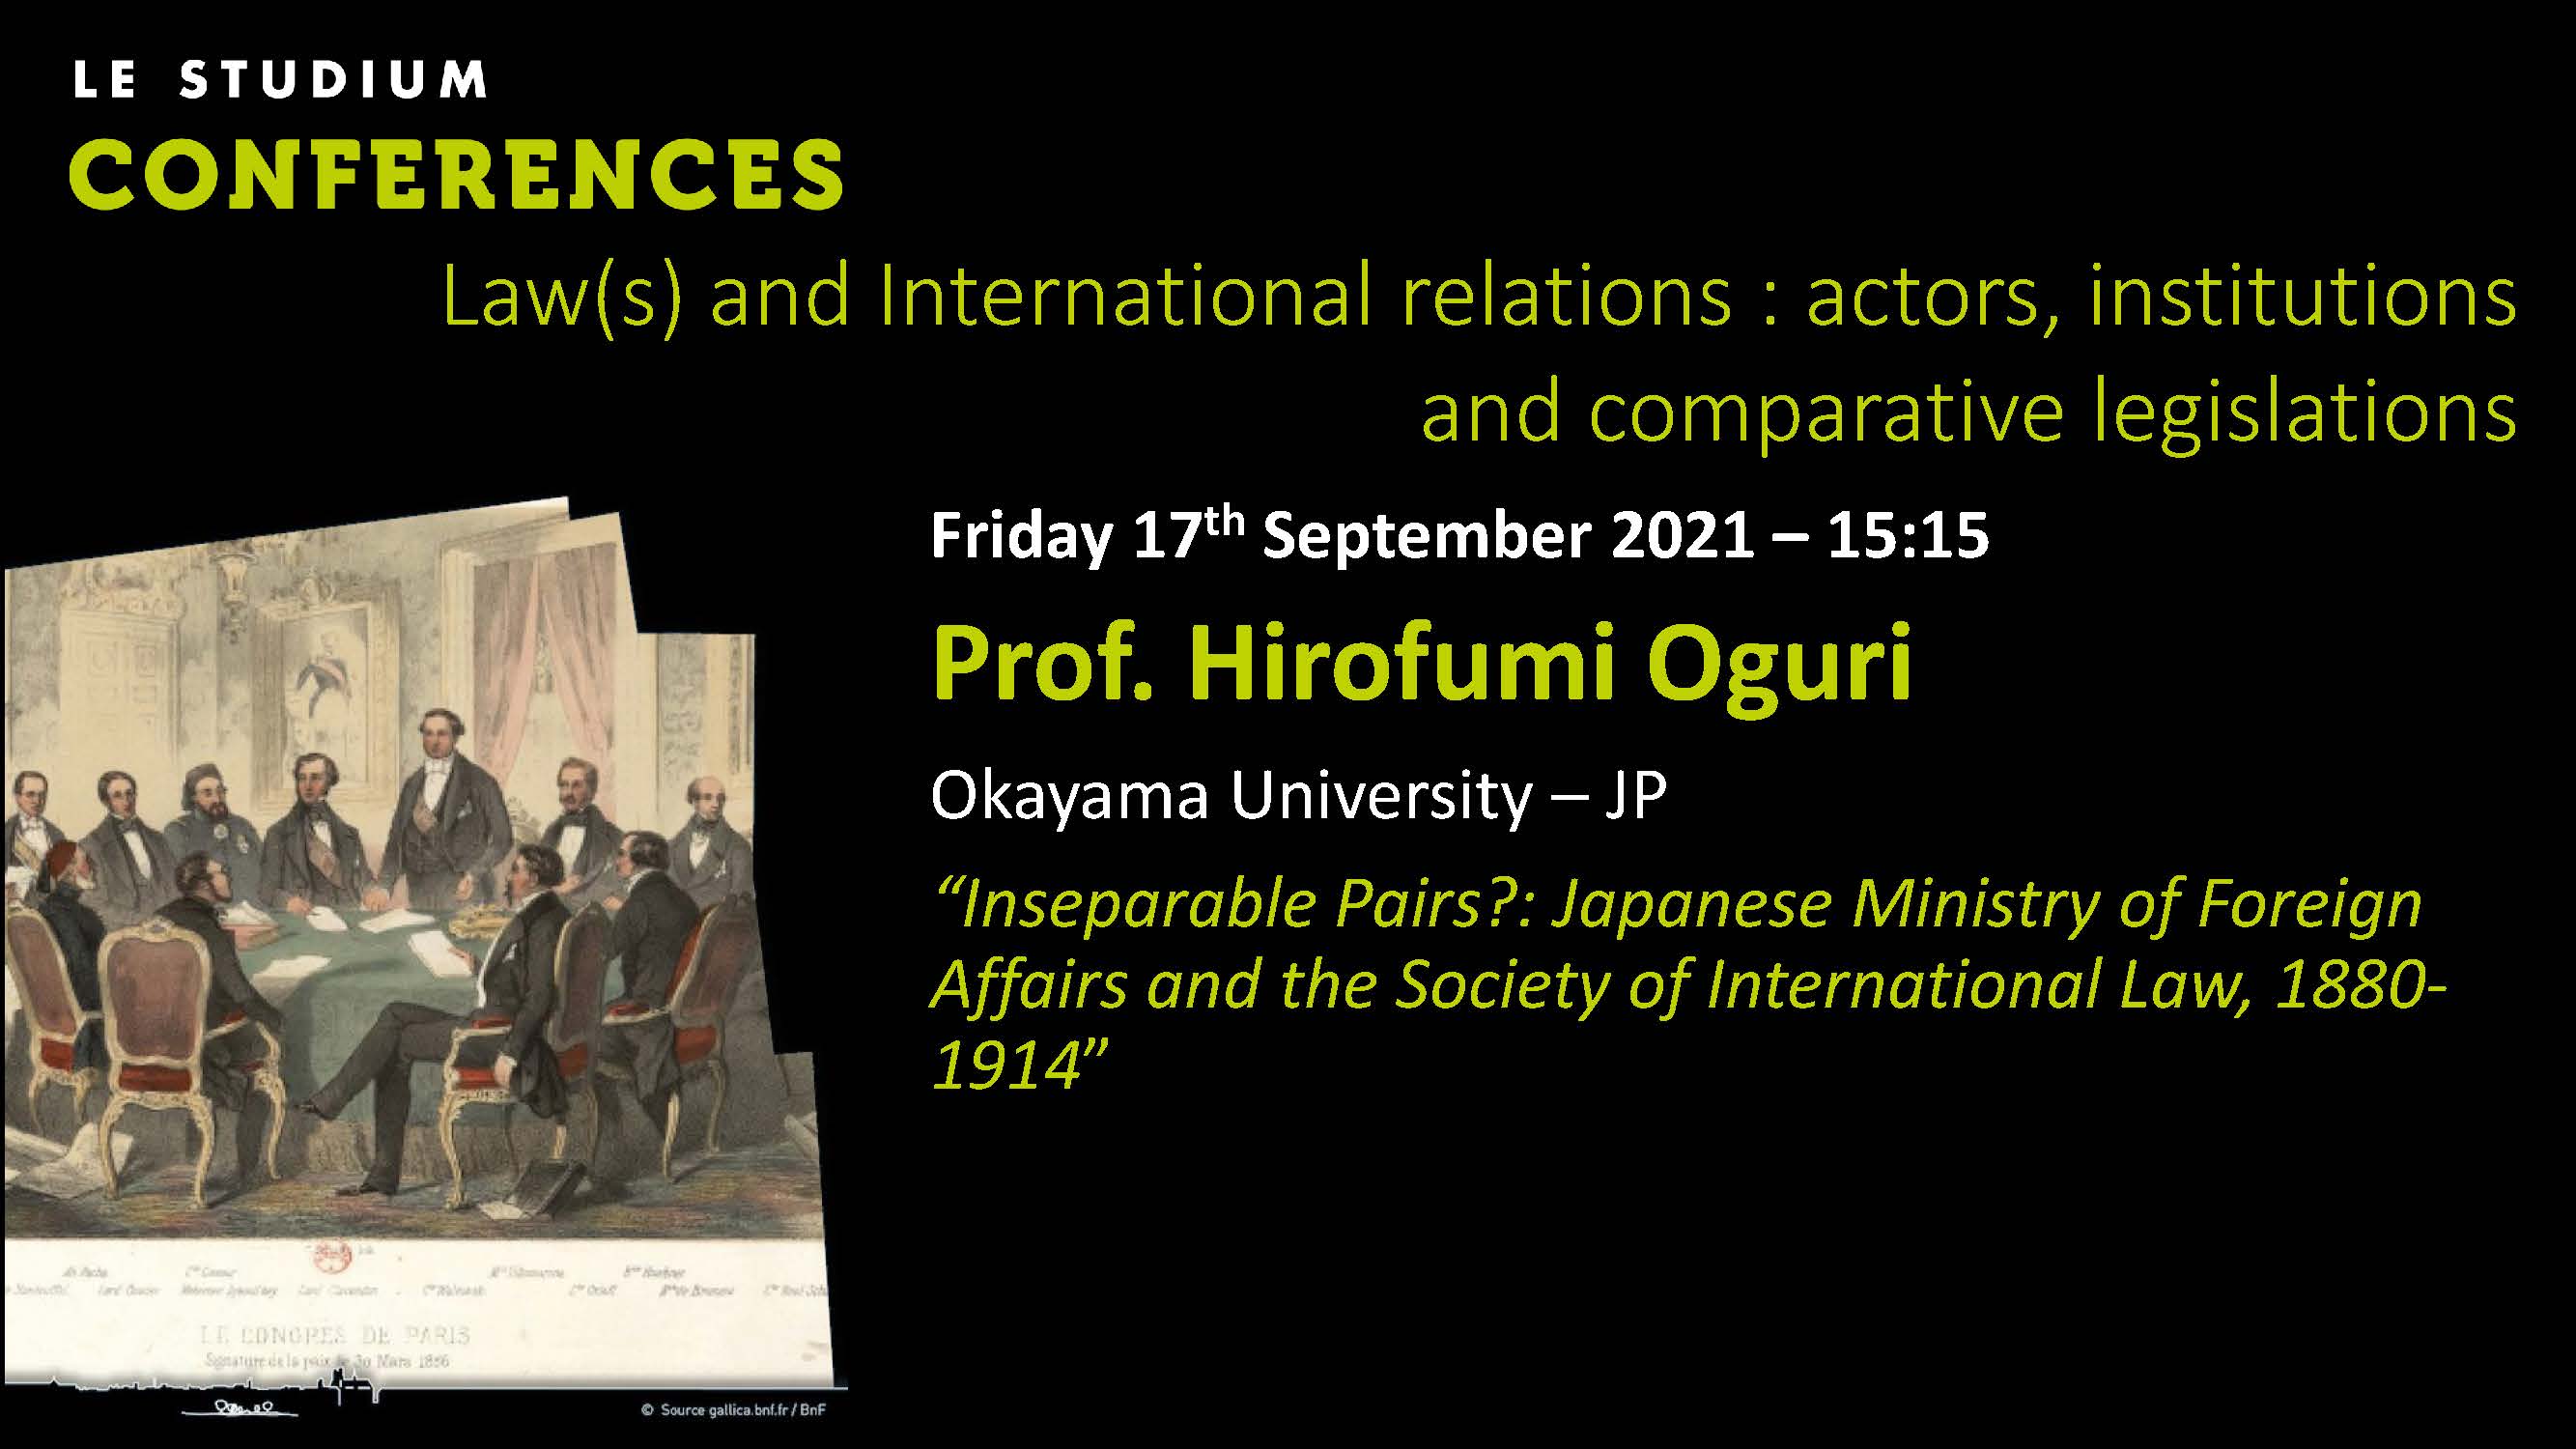 Hirofumi Oguri - Inseparable Pairs?: Japanese Ministry of Foreign Affairs and the Society of International Law, 1880-1914